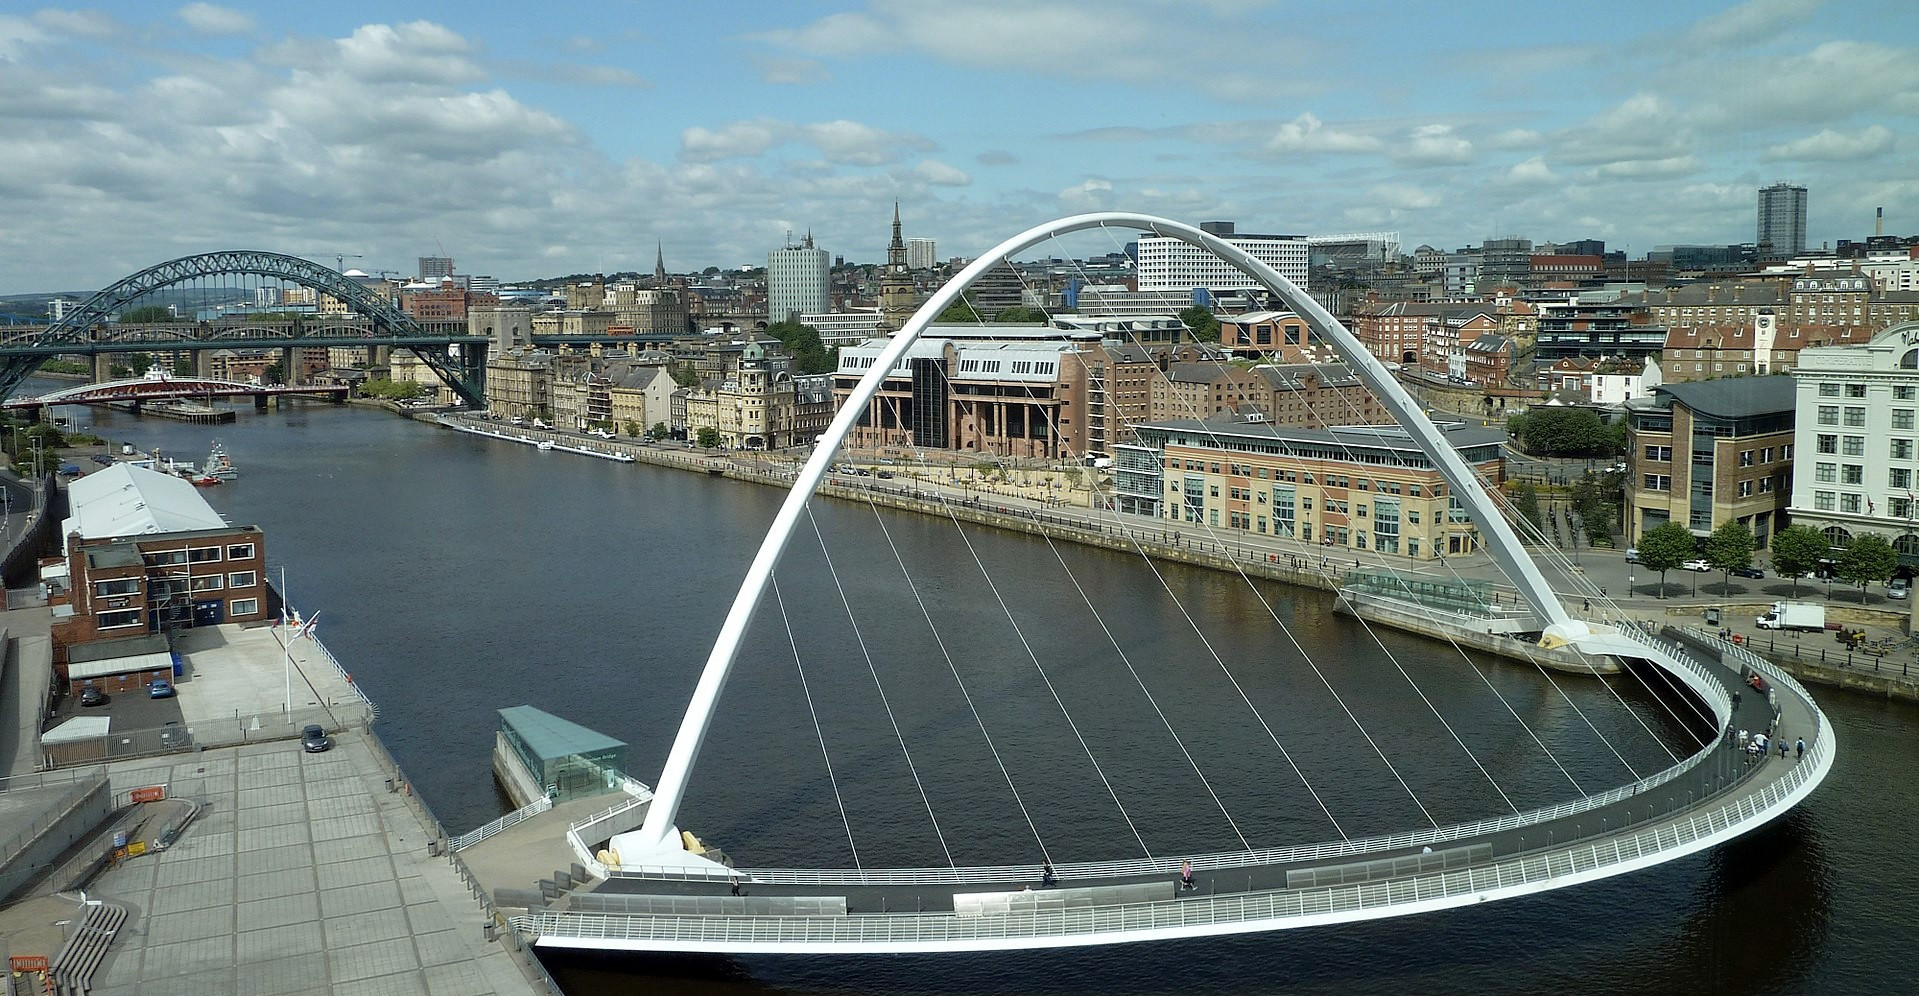 By JimmyGuano - Newcastle-upon-Tyne-bridges-and-skyline.jpg, CC BY-SA 4.0, https://commons.wikimedia.org/w/index.php?curid=34911481